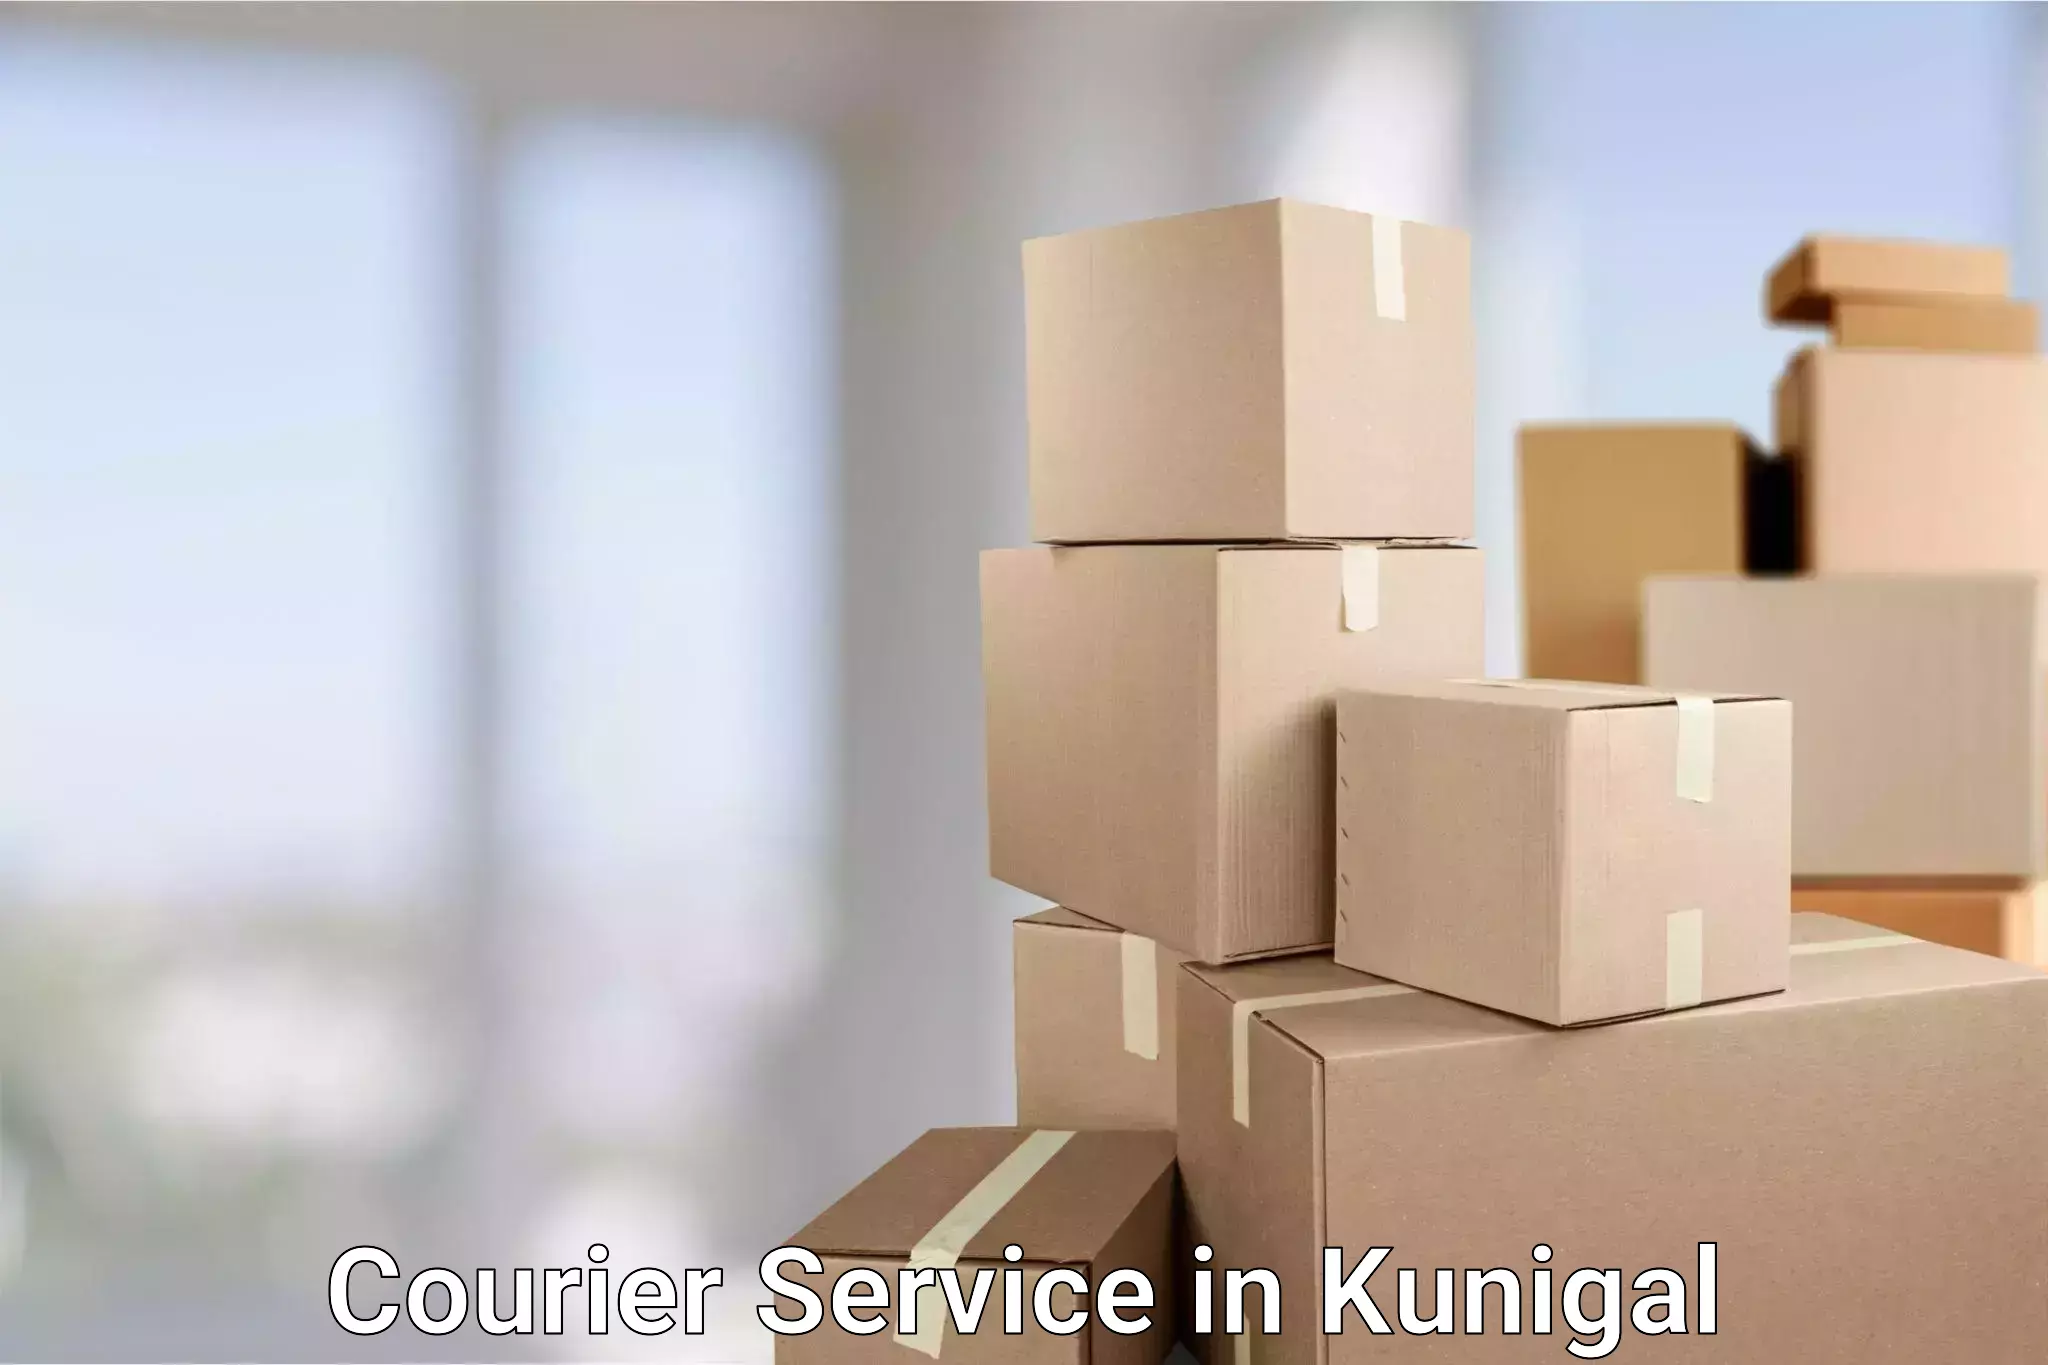 Parcel handling and care in Kunigal